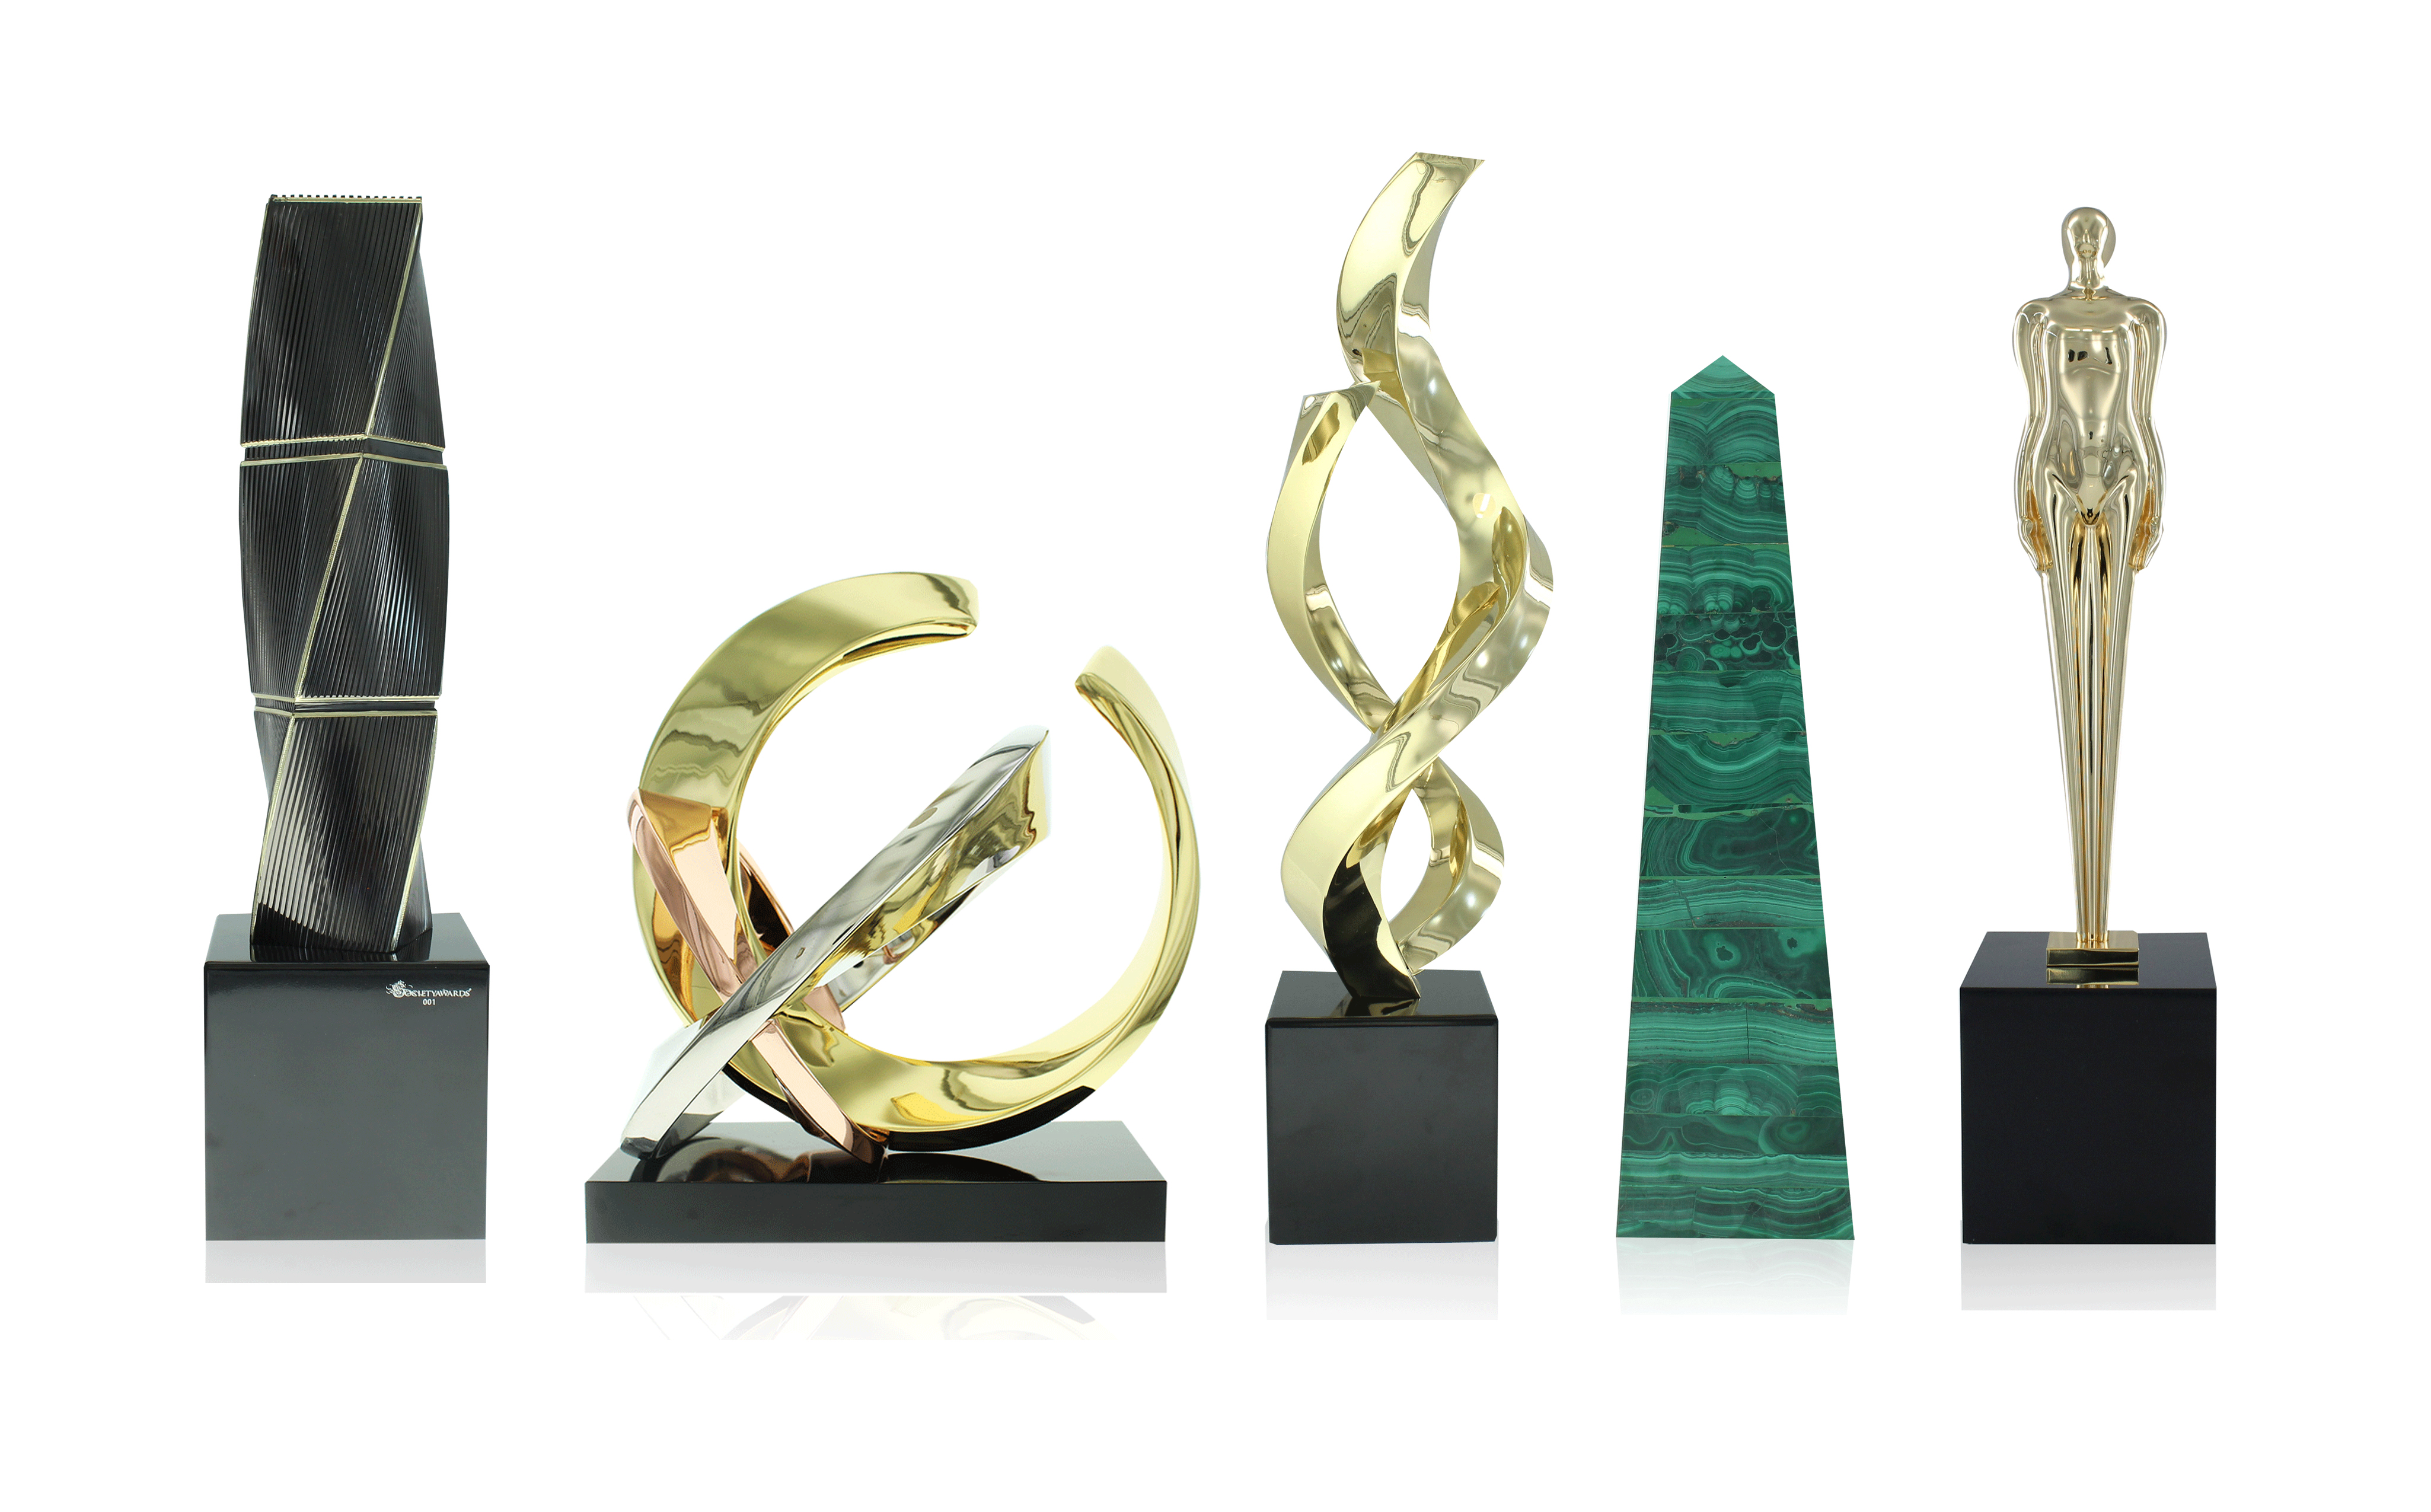 5 trophies from the World's First Limited Editions Collection of awards. From left to right: Twist Texture, Rings, Ribbons, Malachite Obelisk, Figure.